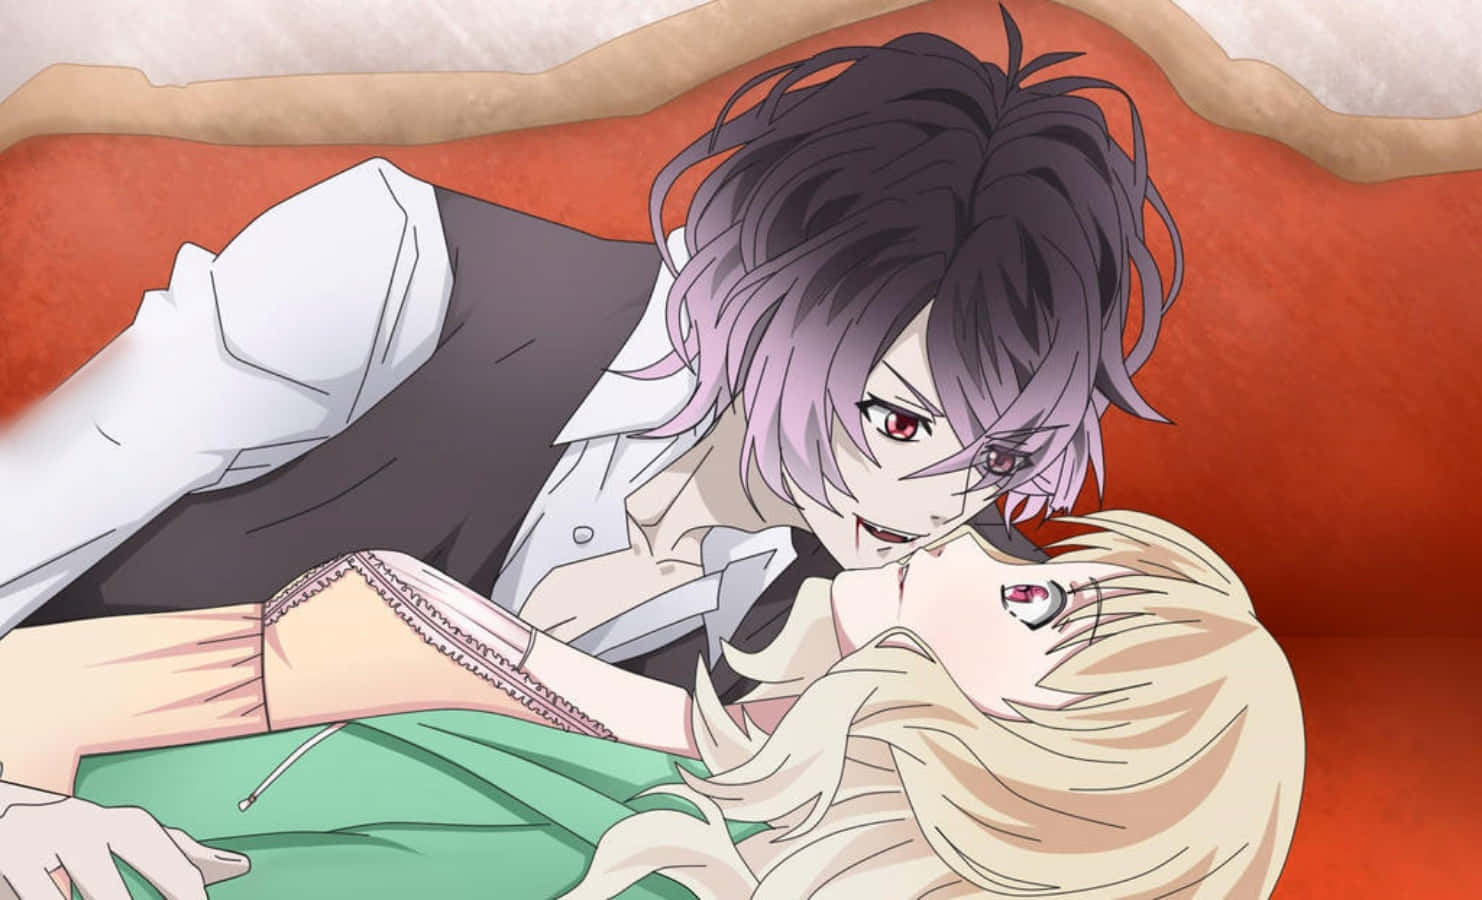 "Experience Unearthly Romantic Fright with Diabolik Lovers"